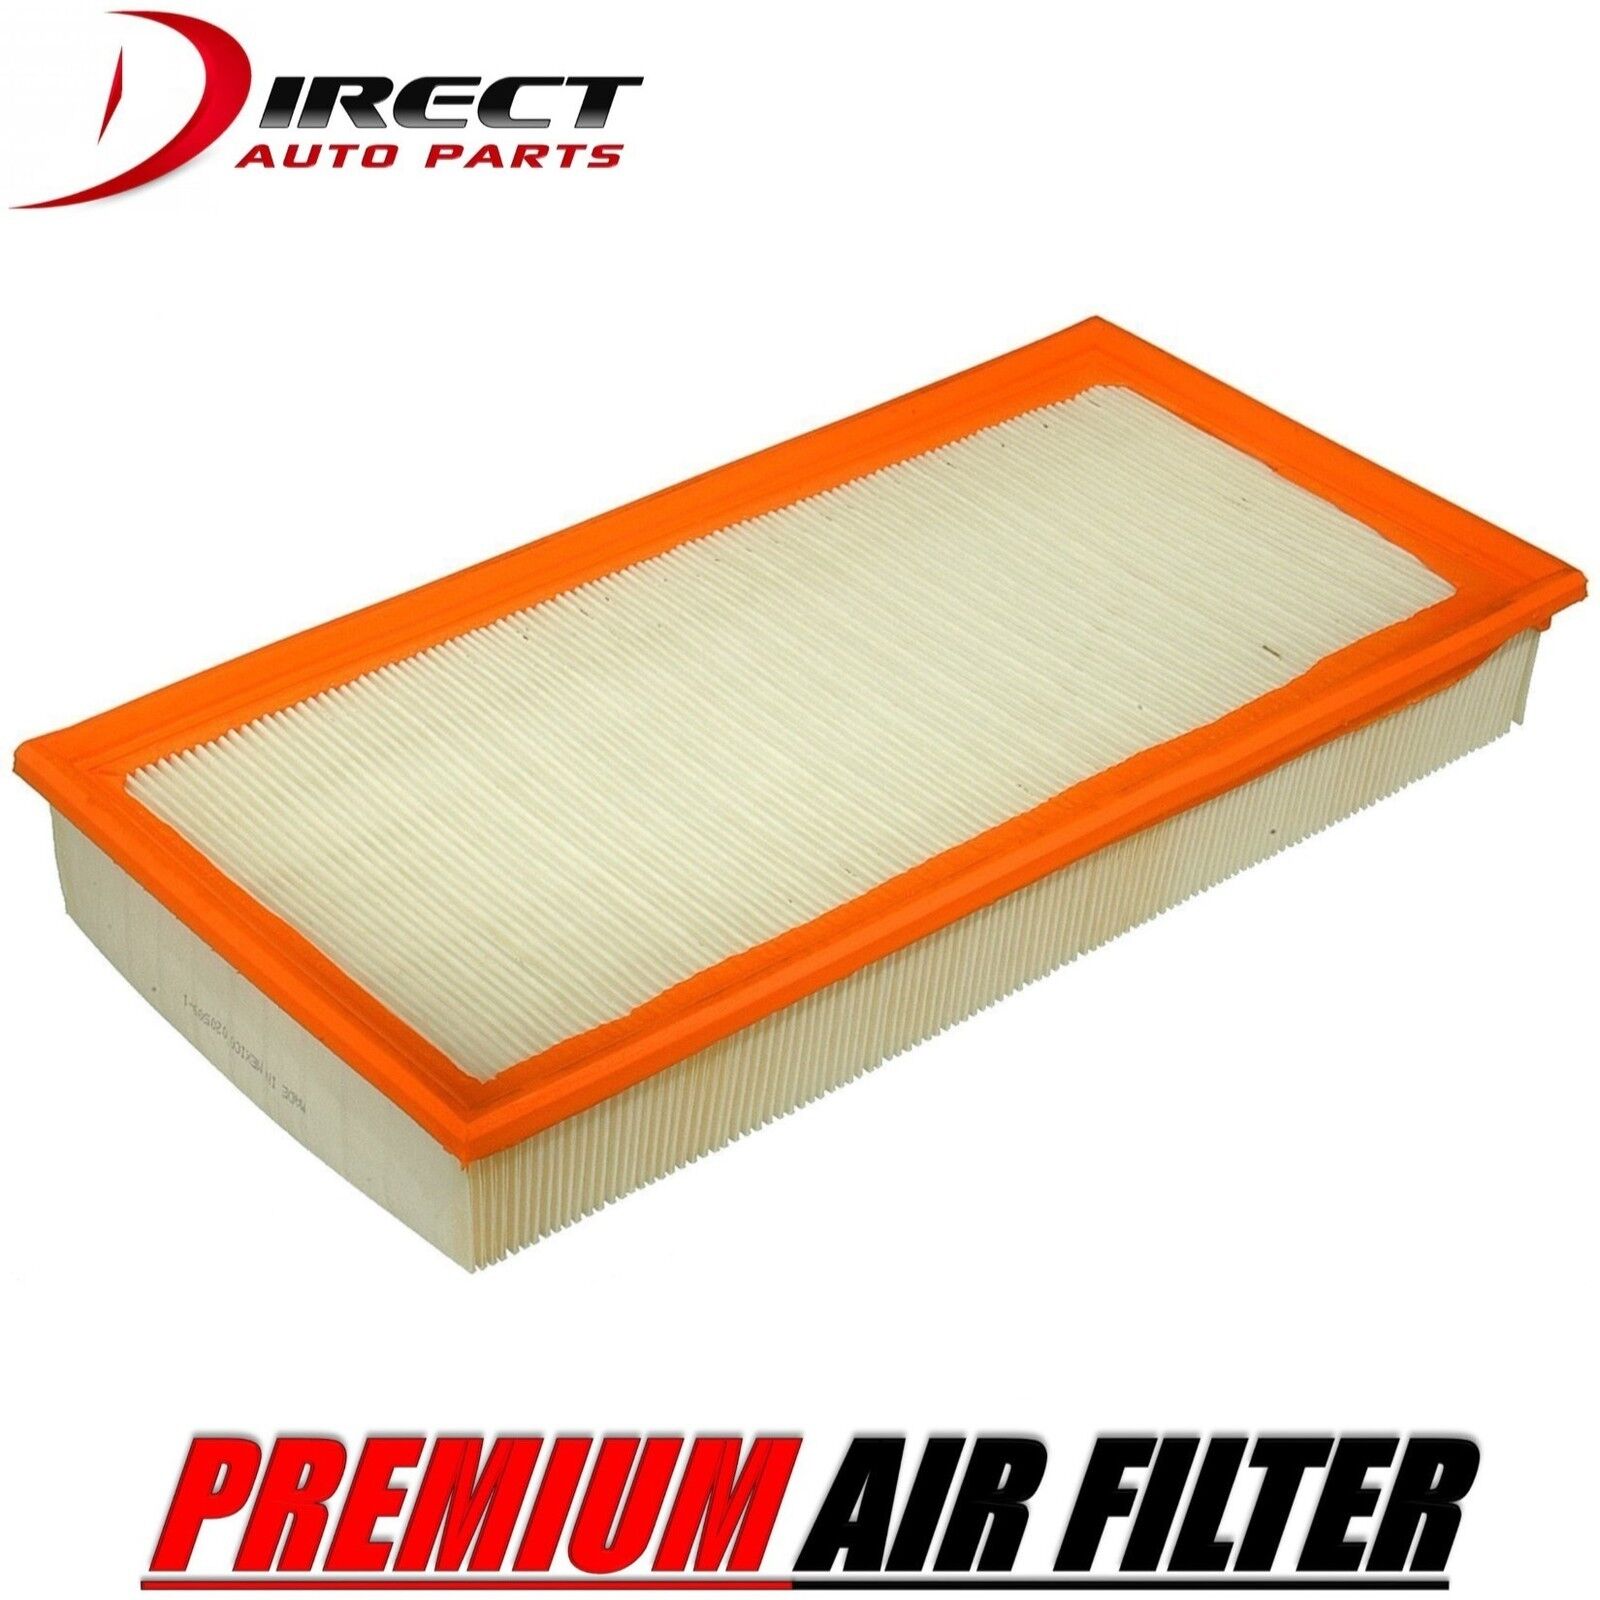 FORD AIR FILTER FOR FORD EDGE 3.5L ENGINE 2007 - 2014